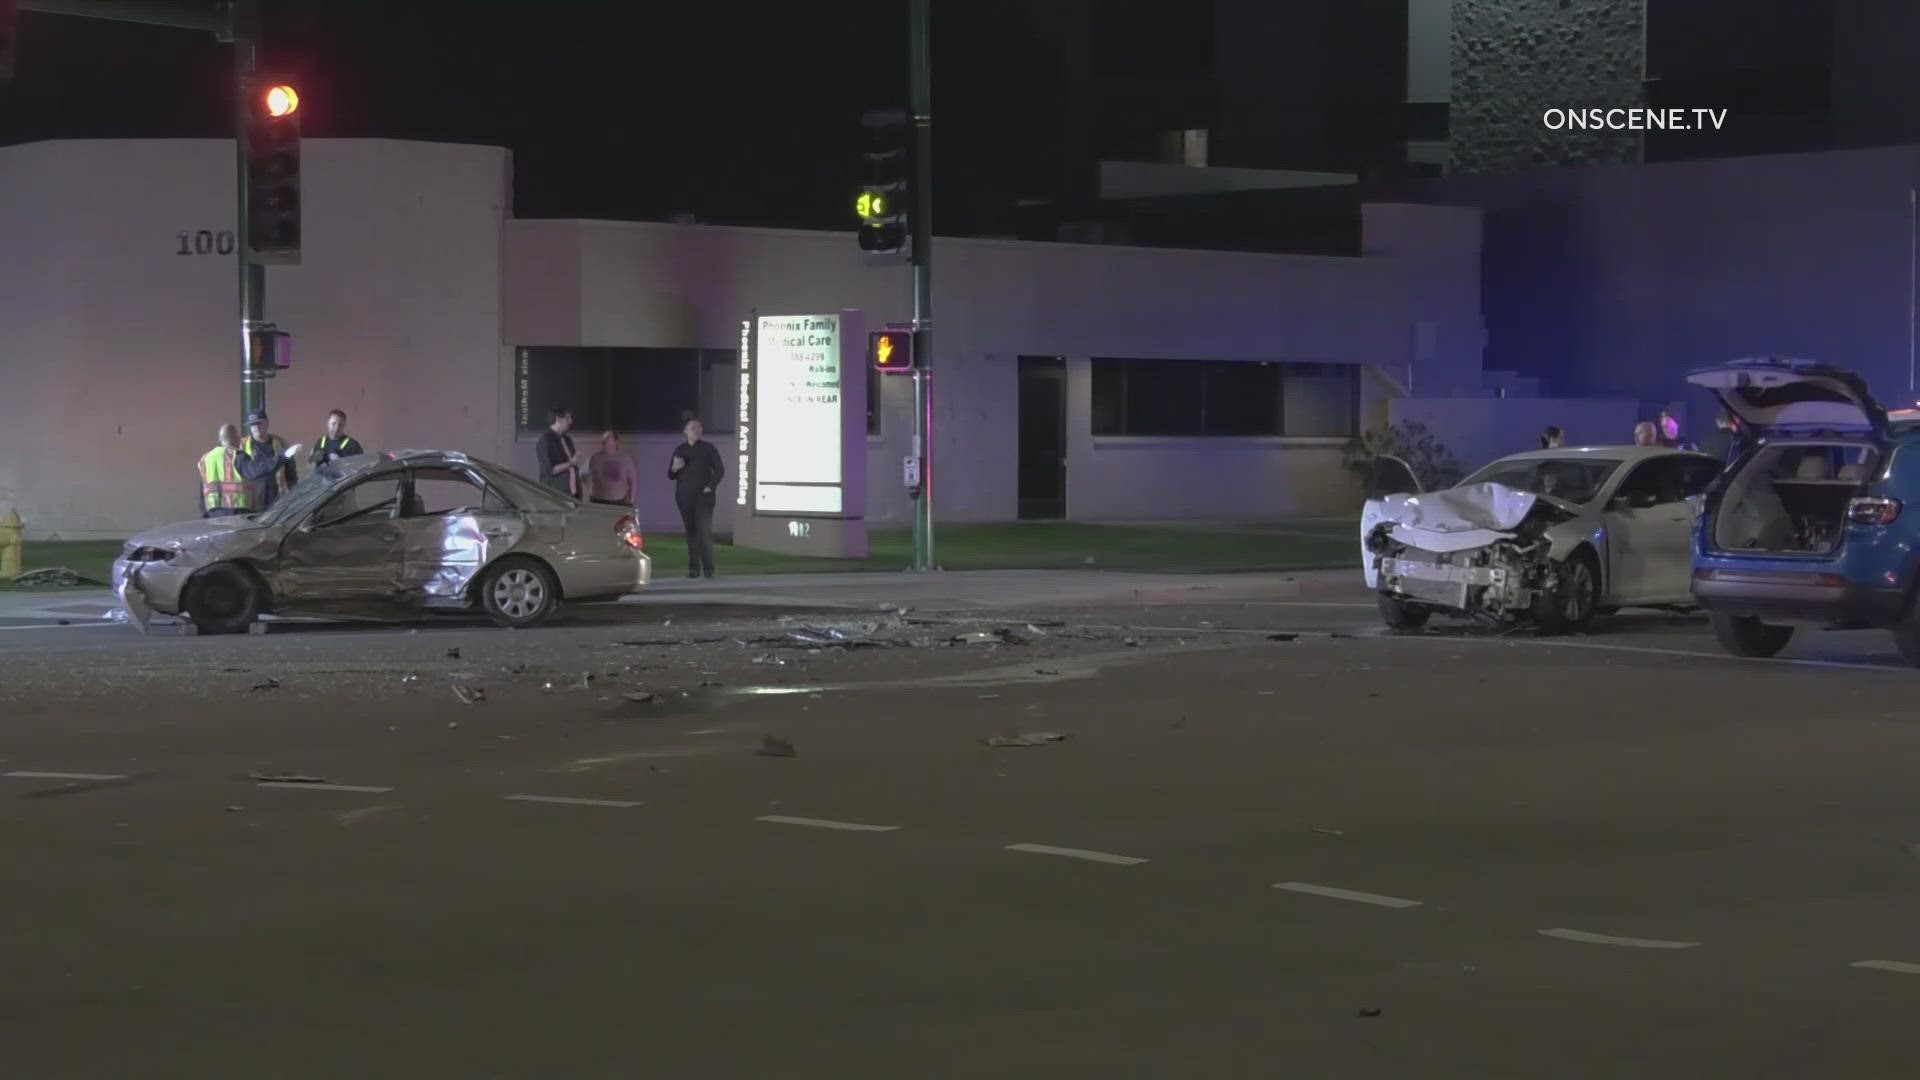 A man reportedly fled the scene after his vehicle was struck by another car that ran a red light, Phoenix police said.